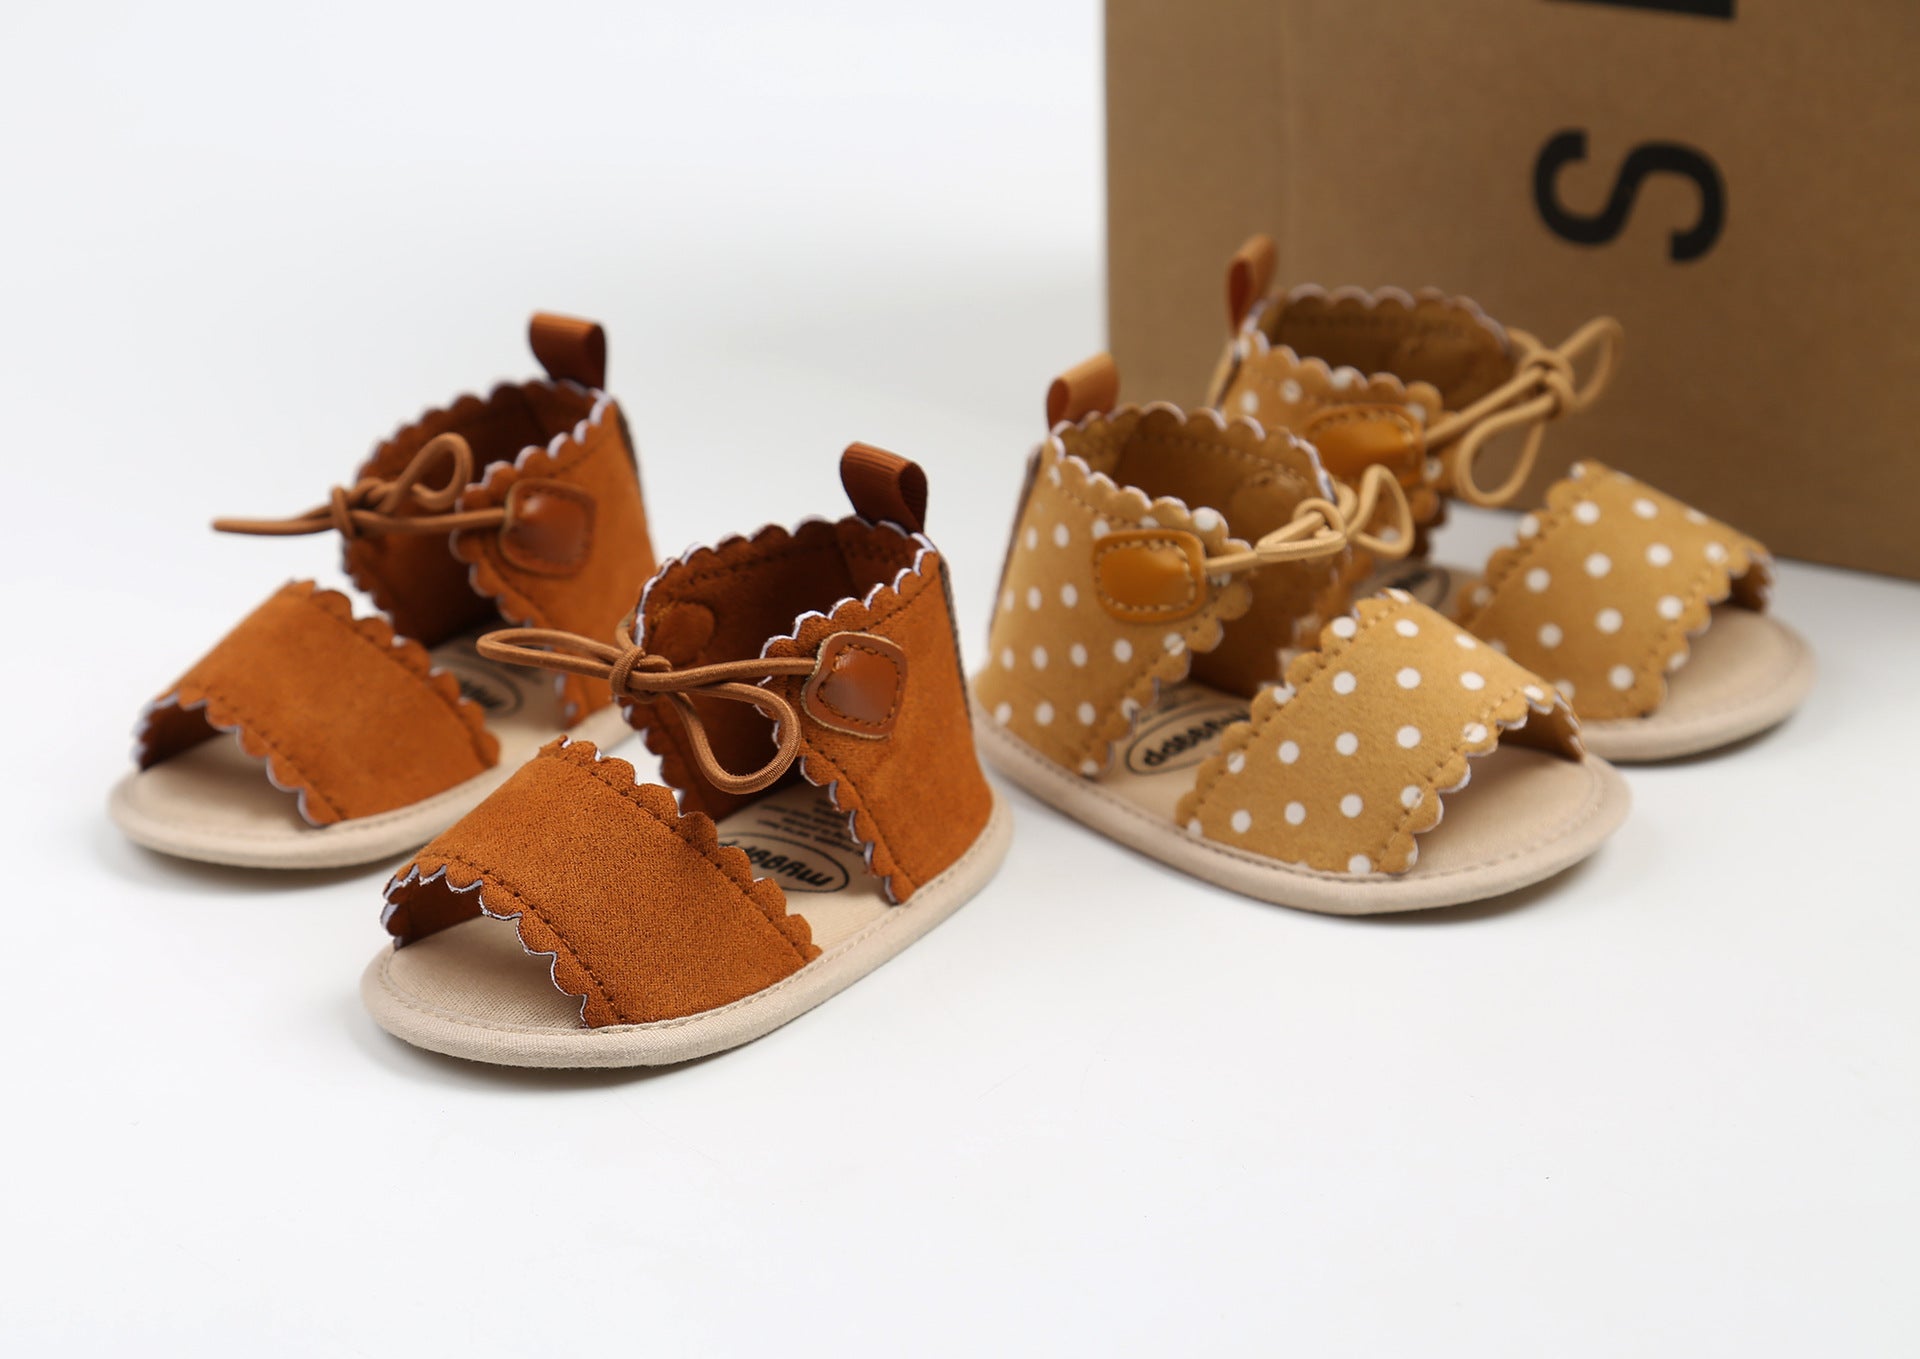 Dot Baby Sandals, Baby Shoes, Toddler Shoes, Women's Bowknot M2009